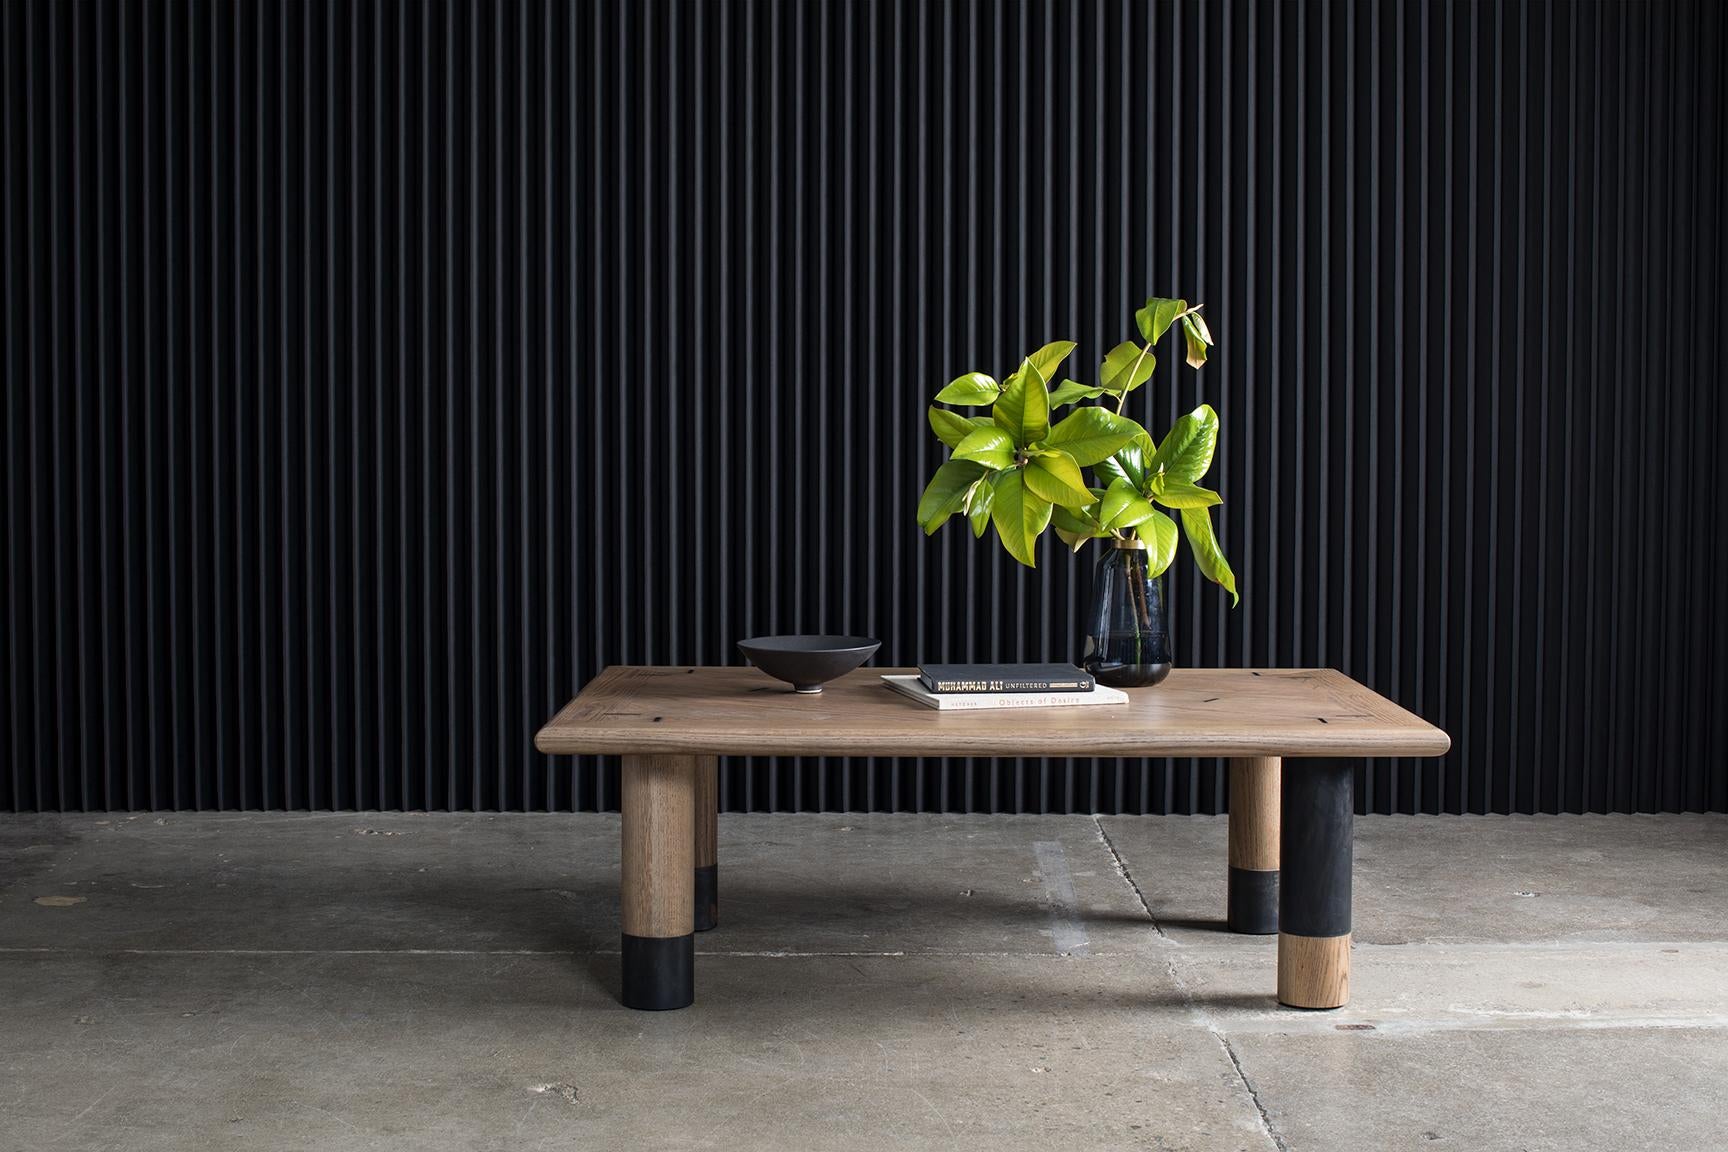 This piece is named after Italian designer, Romeo Gigli, known for his unique, sculptural take on the “power dressing” trend of the 1980s. Much like his designs, the GIGLI Coffee Table is powerful, asymmetrical, and grounded. The pattern play with